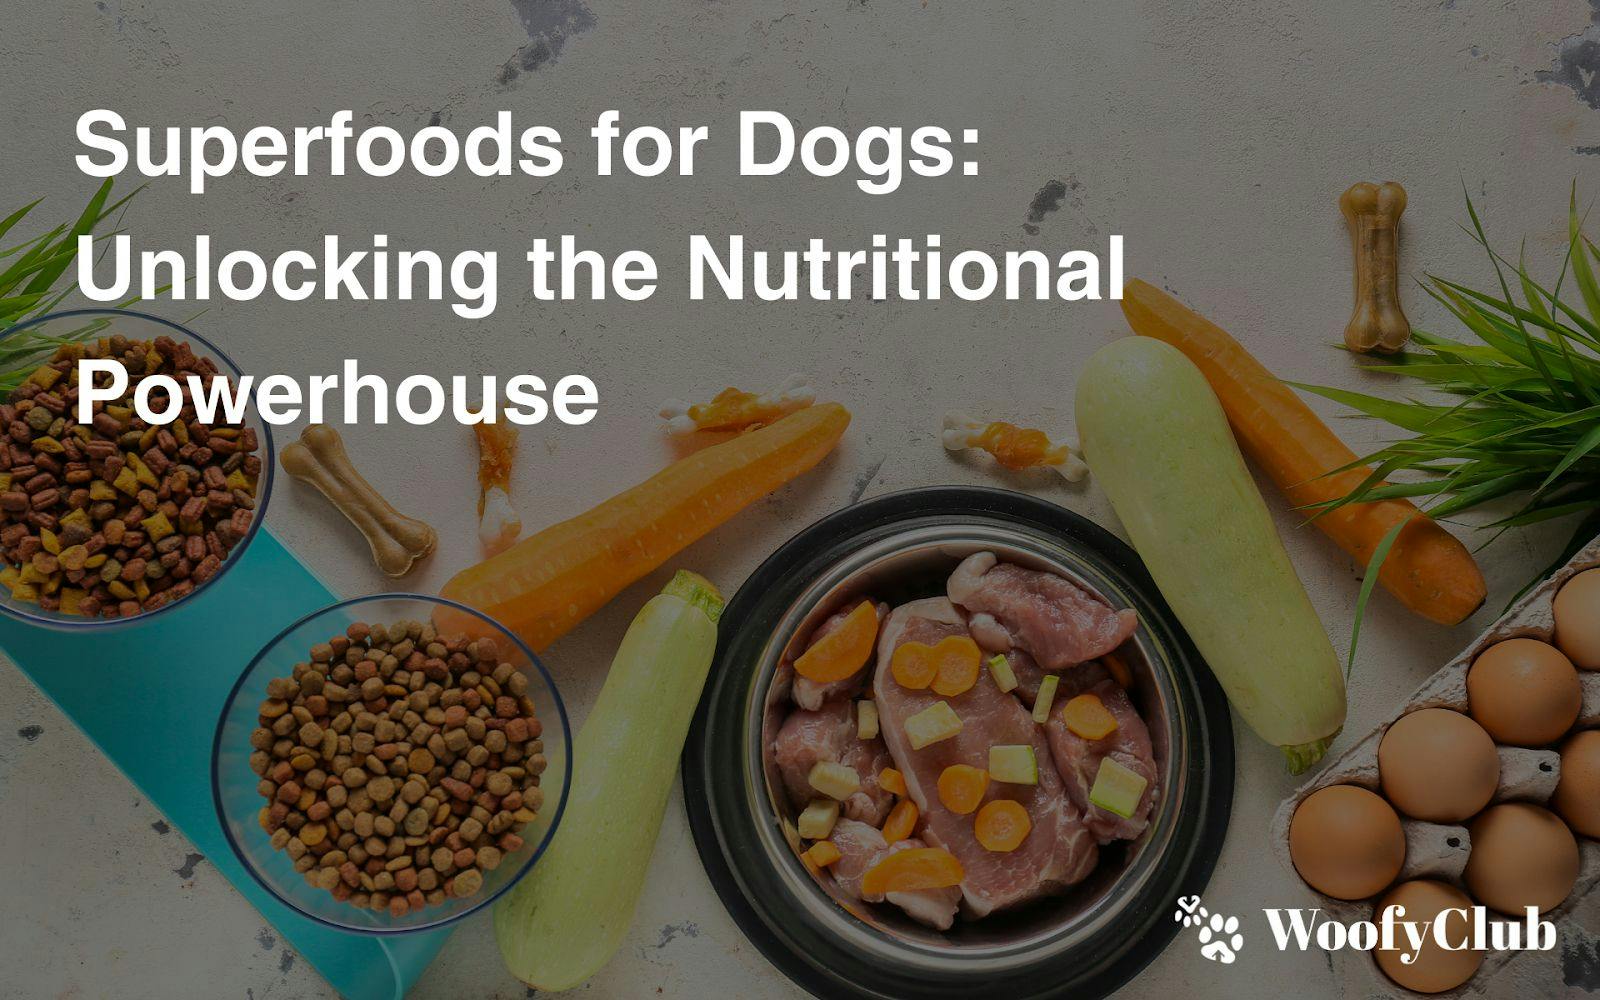 Superfoods For Dogs: Unlocking The Nutritional Powerhouse